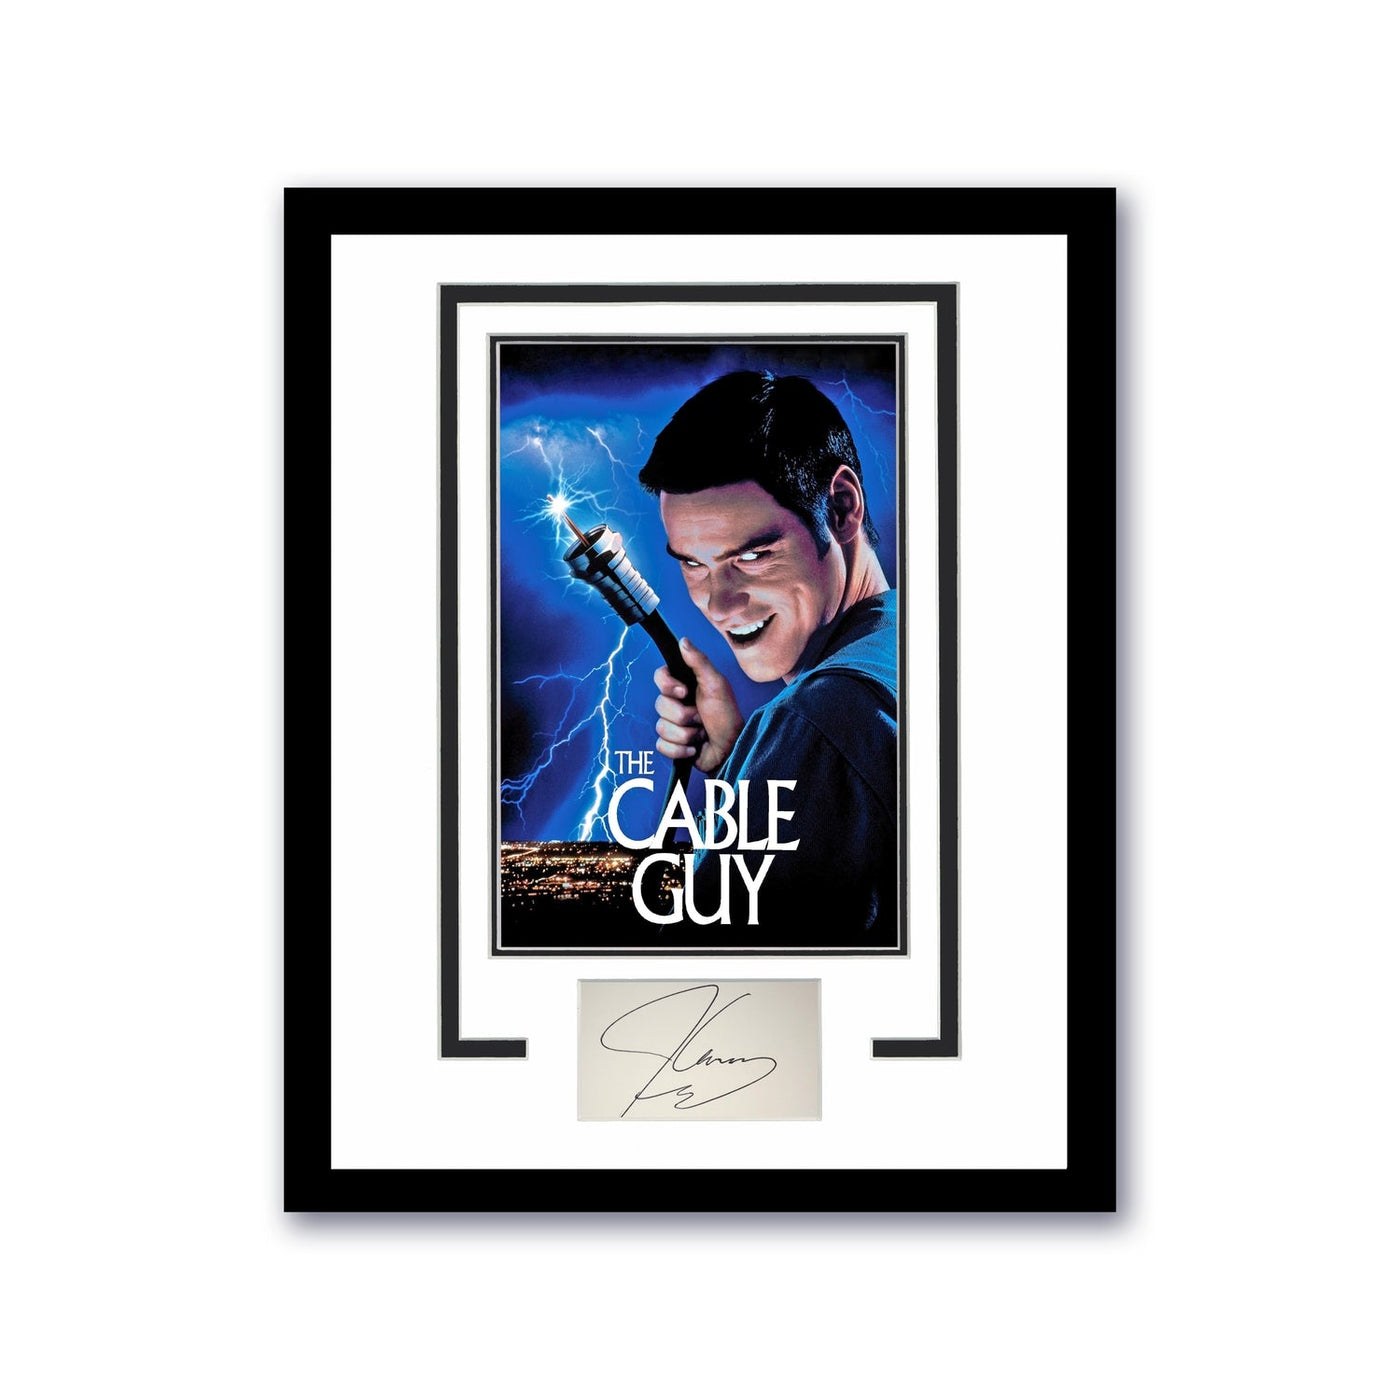 The Cable Guy Jim Carrey Autographed Signed 11x14 Framed Poster Photo ACOA